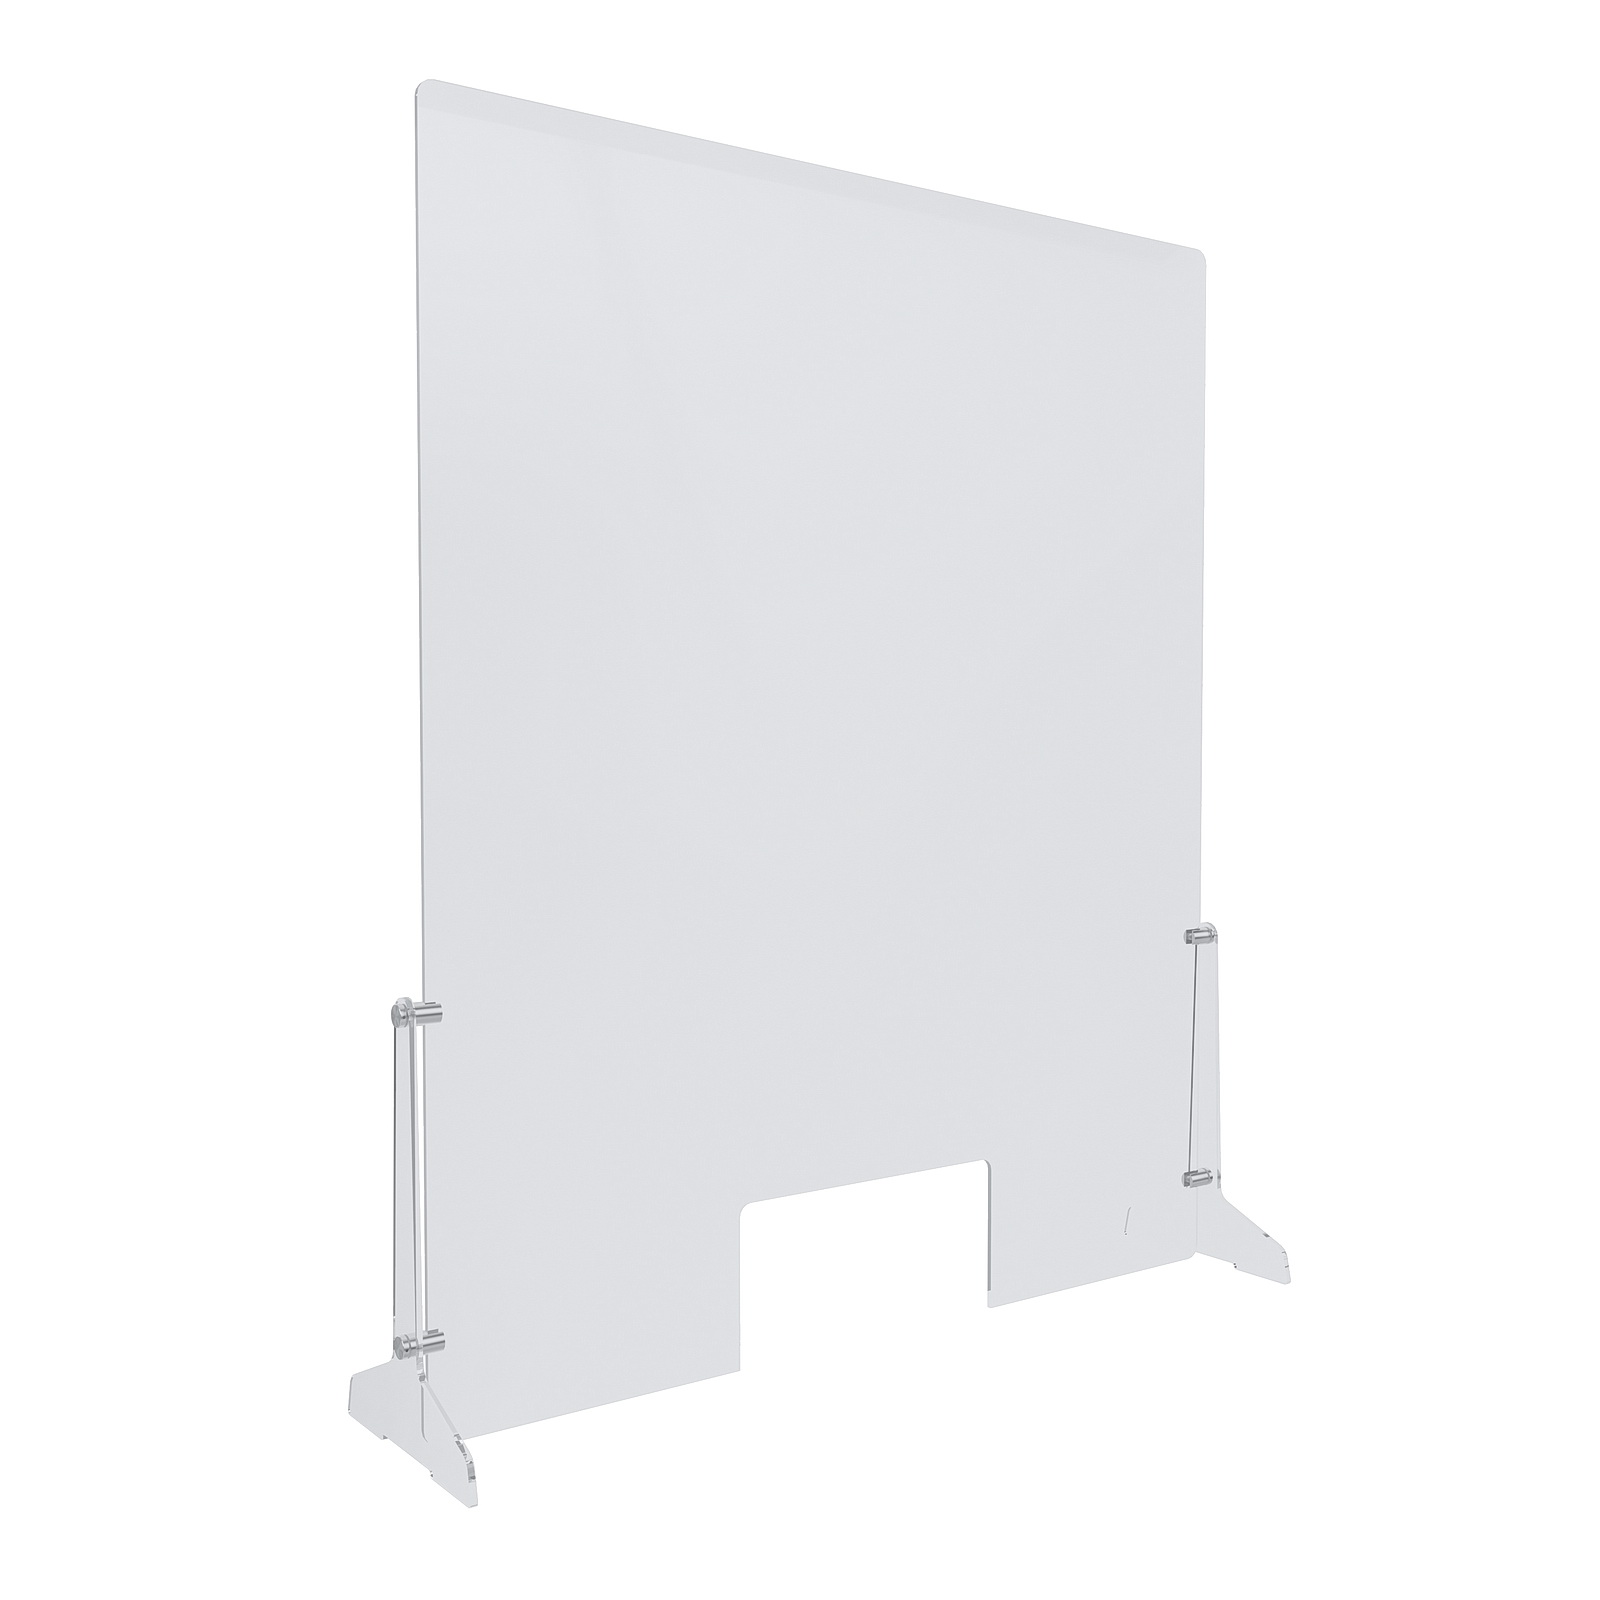 Clear Acrylic Sneeze Guard 30'' Wide x 36'' Tall (10'' x 5'' Cut Out), with (2) 7'' Wide x 12-5/16'' Deep Feet on the Side, and (4) Aluminum Clear Anodized Forks / Standoffs.